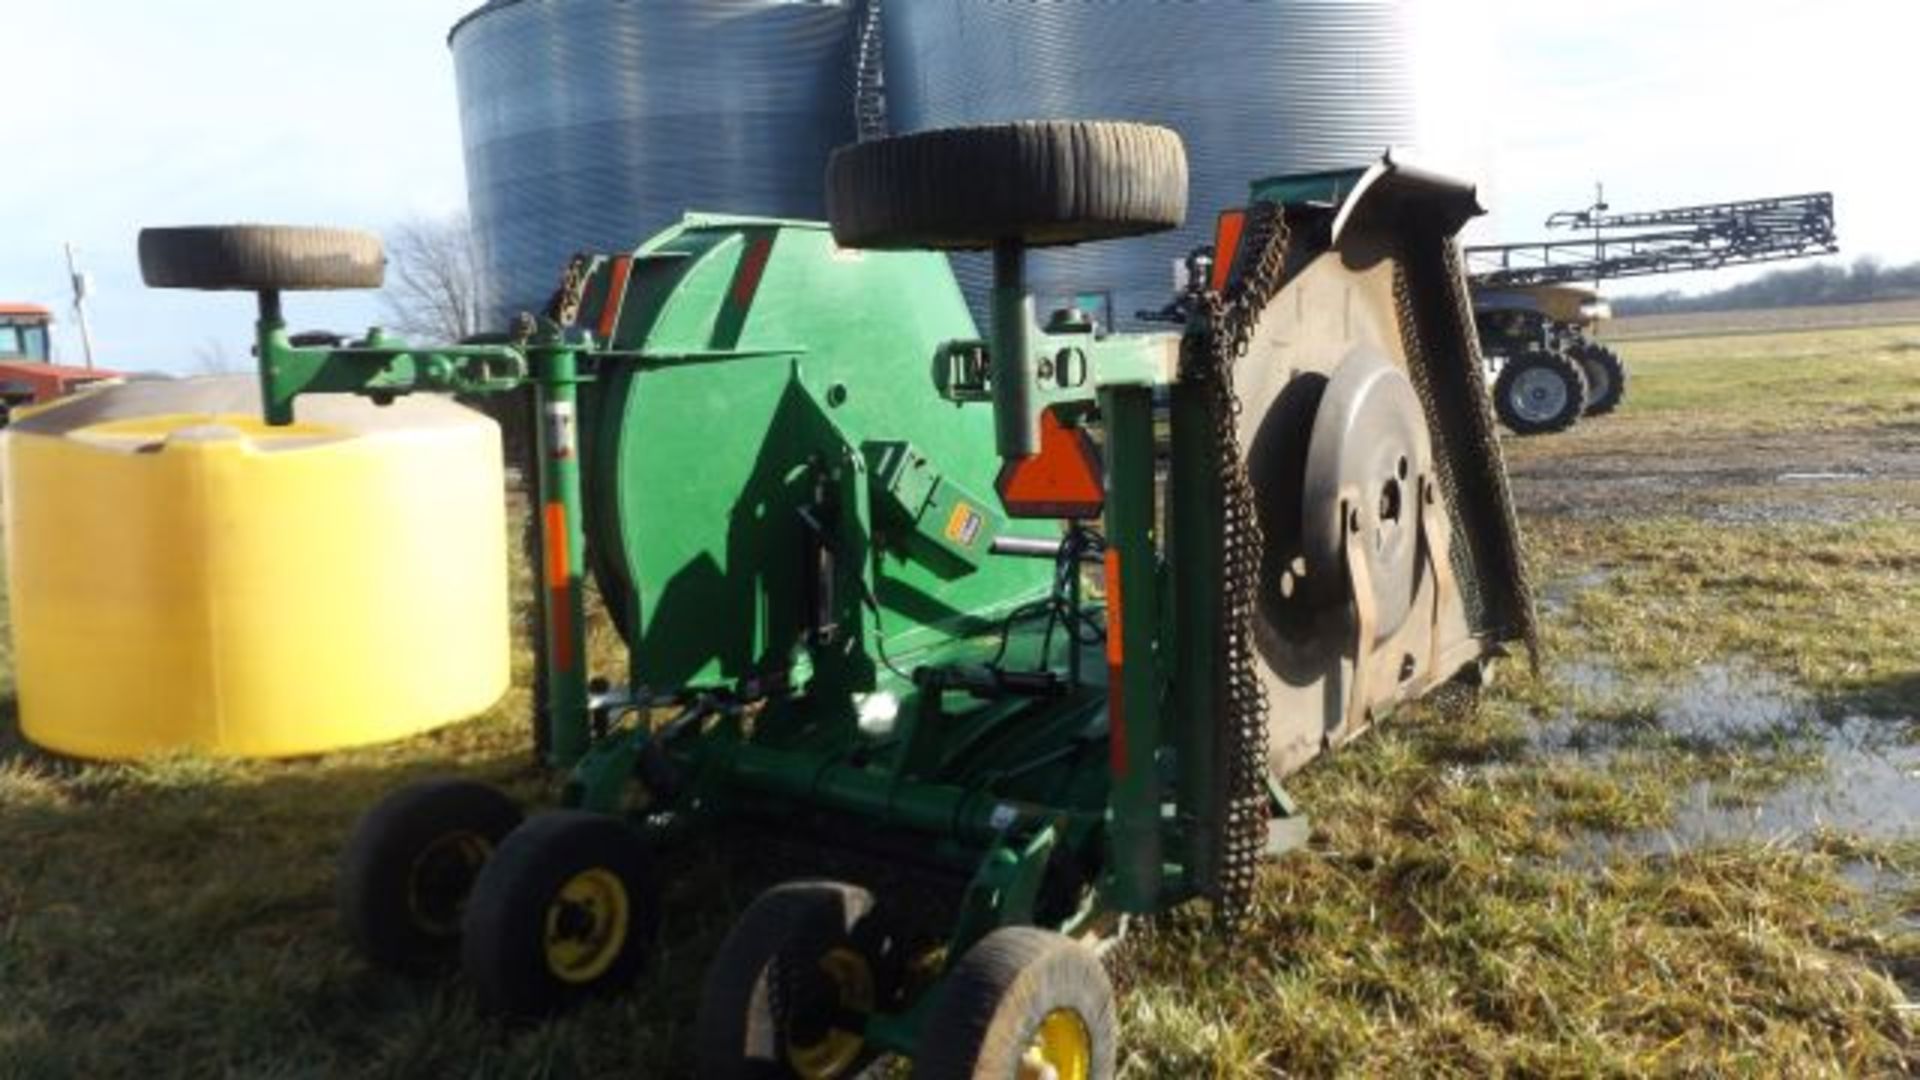 JD HX15 Cutter, 1000 PTO, Front & Rear Chains, 6 Wheels, Sr#POH415F018588 - Image 3 of 4